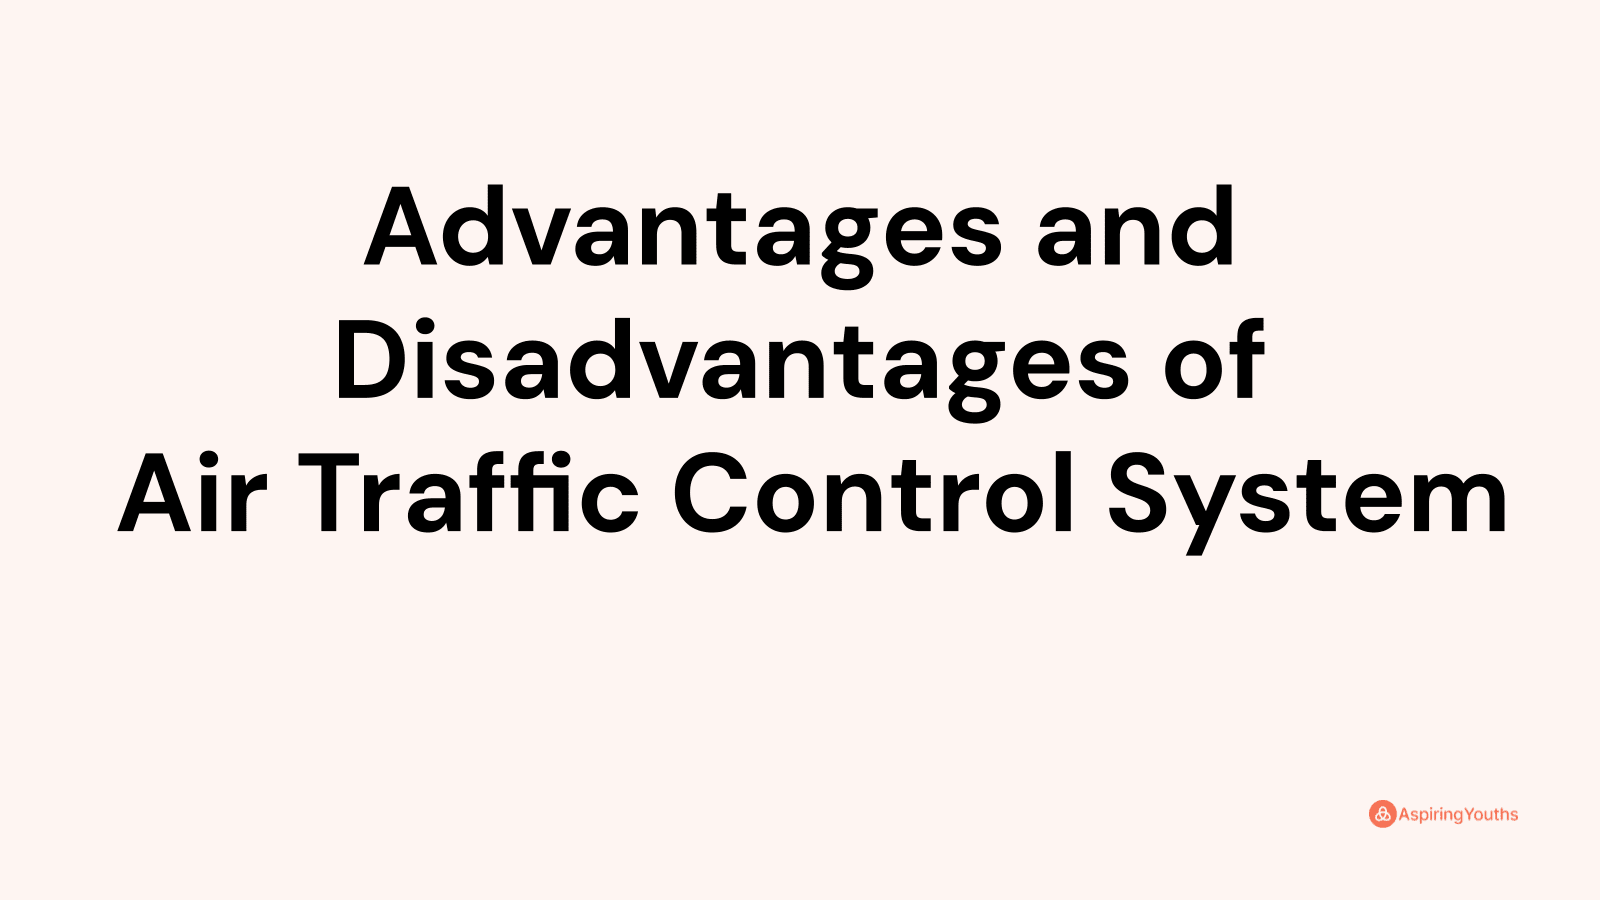 Advantages and disadvantages of Air Traffic Control System